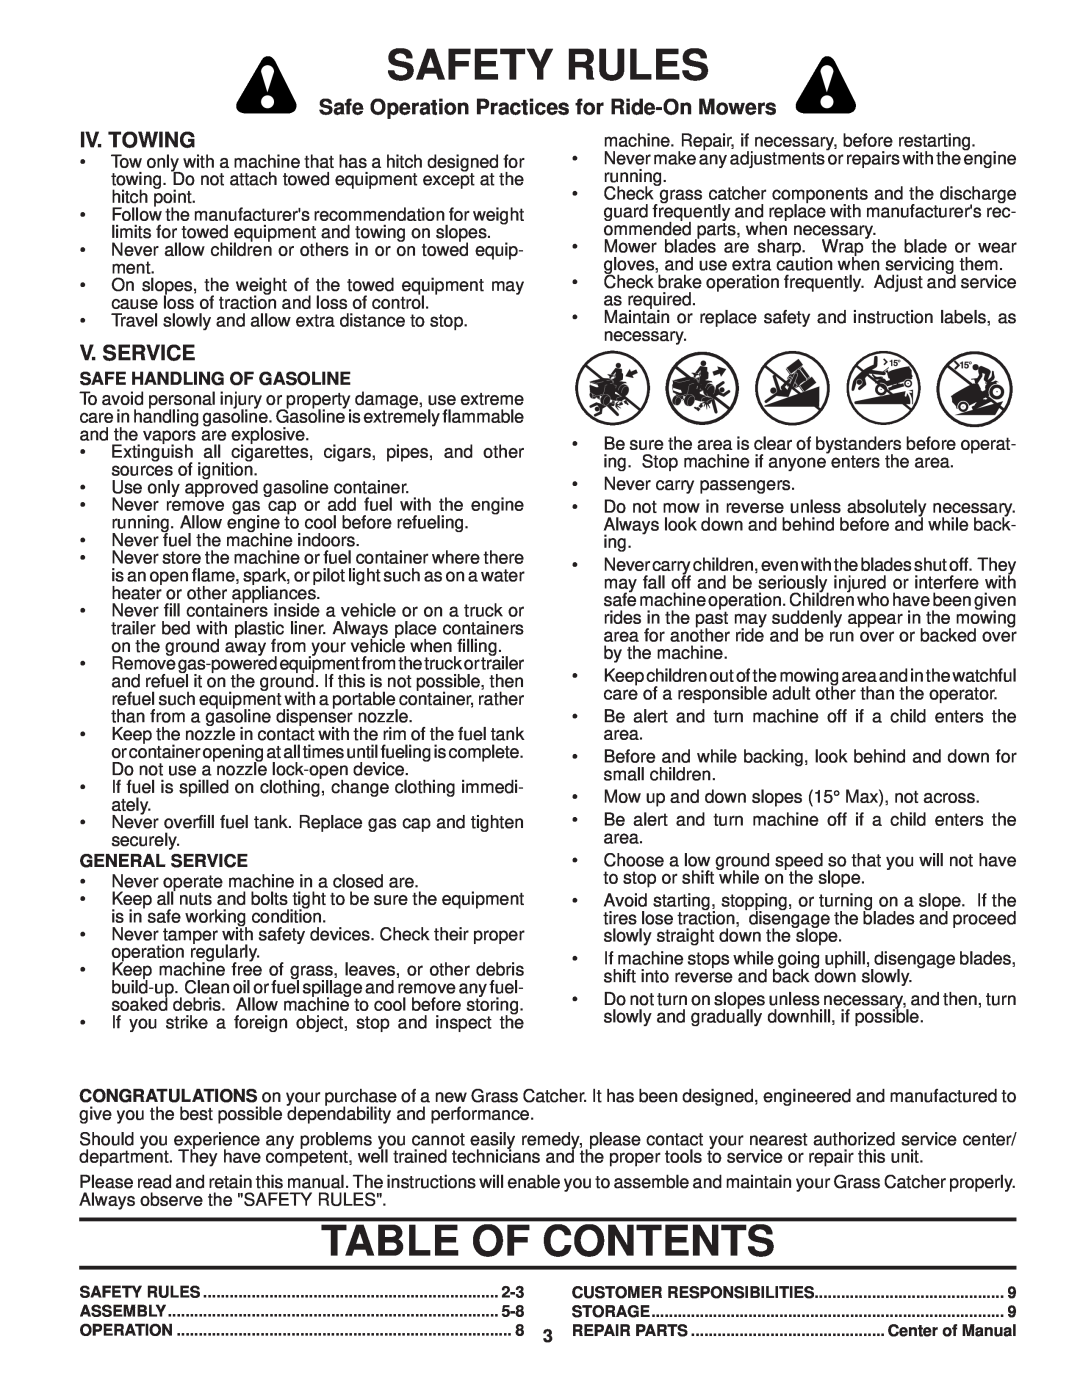 Husqvarna H346SG Table Of Contents, Iv. Towing, V. Service, Safety Rules, Safe Operation Practices for Ride-On Mowers 